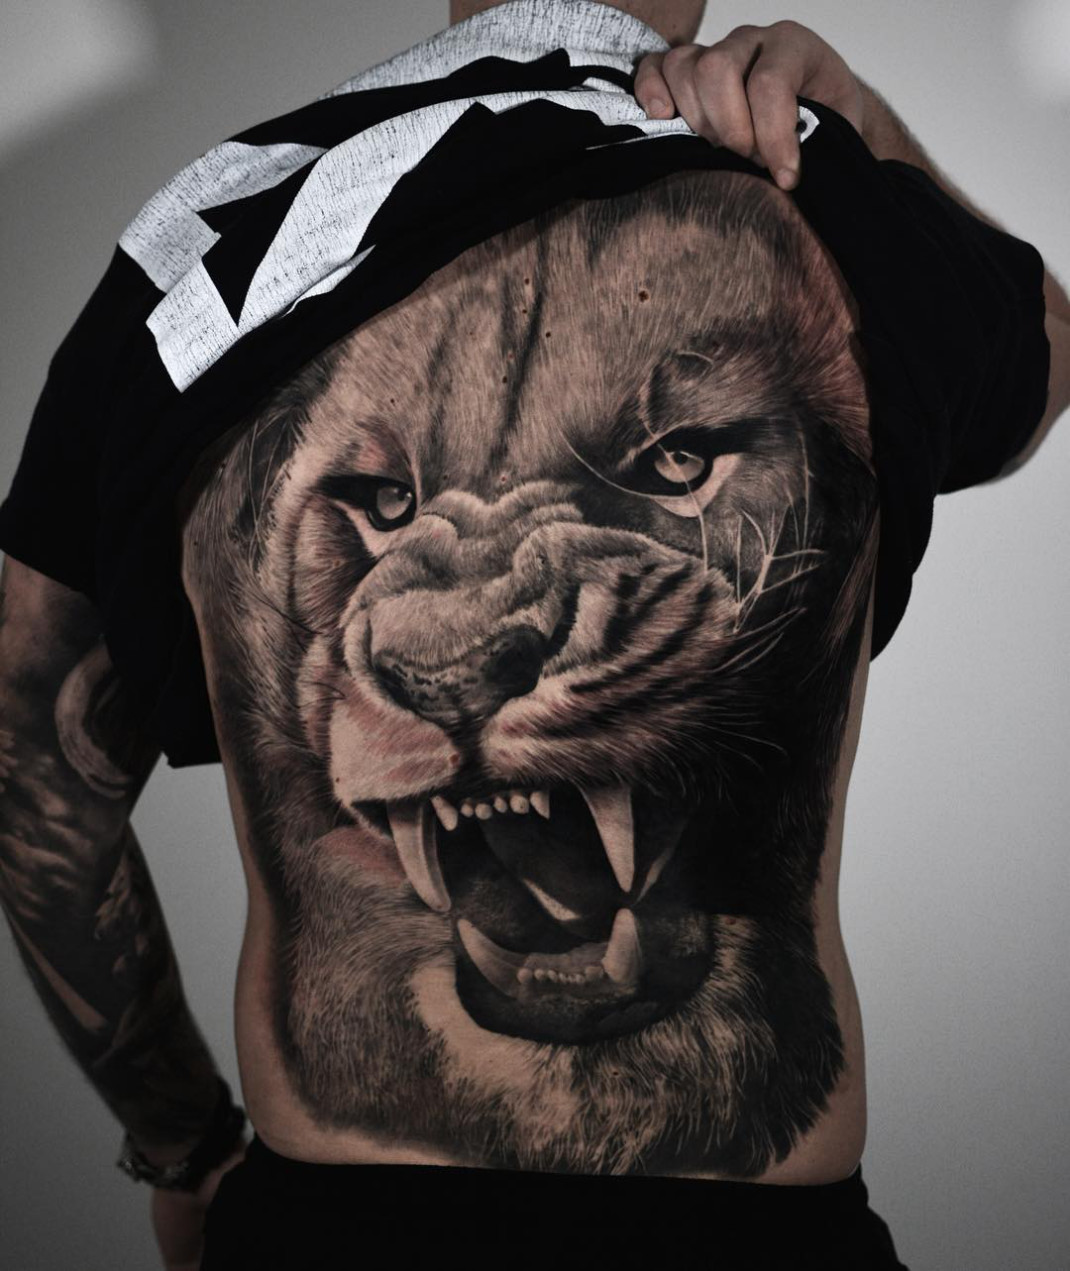 Details more than 142 back tattoo lion